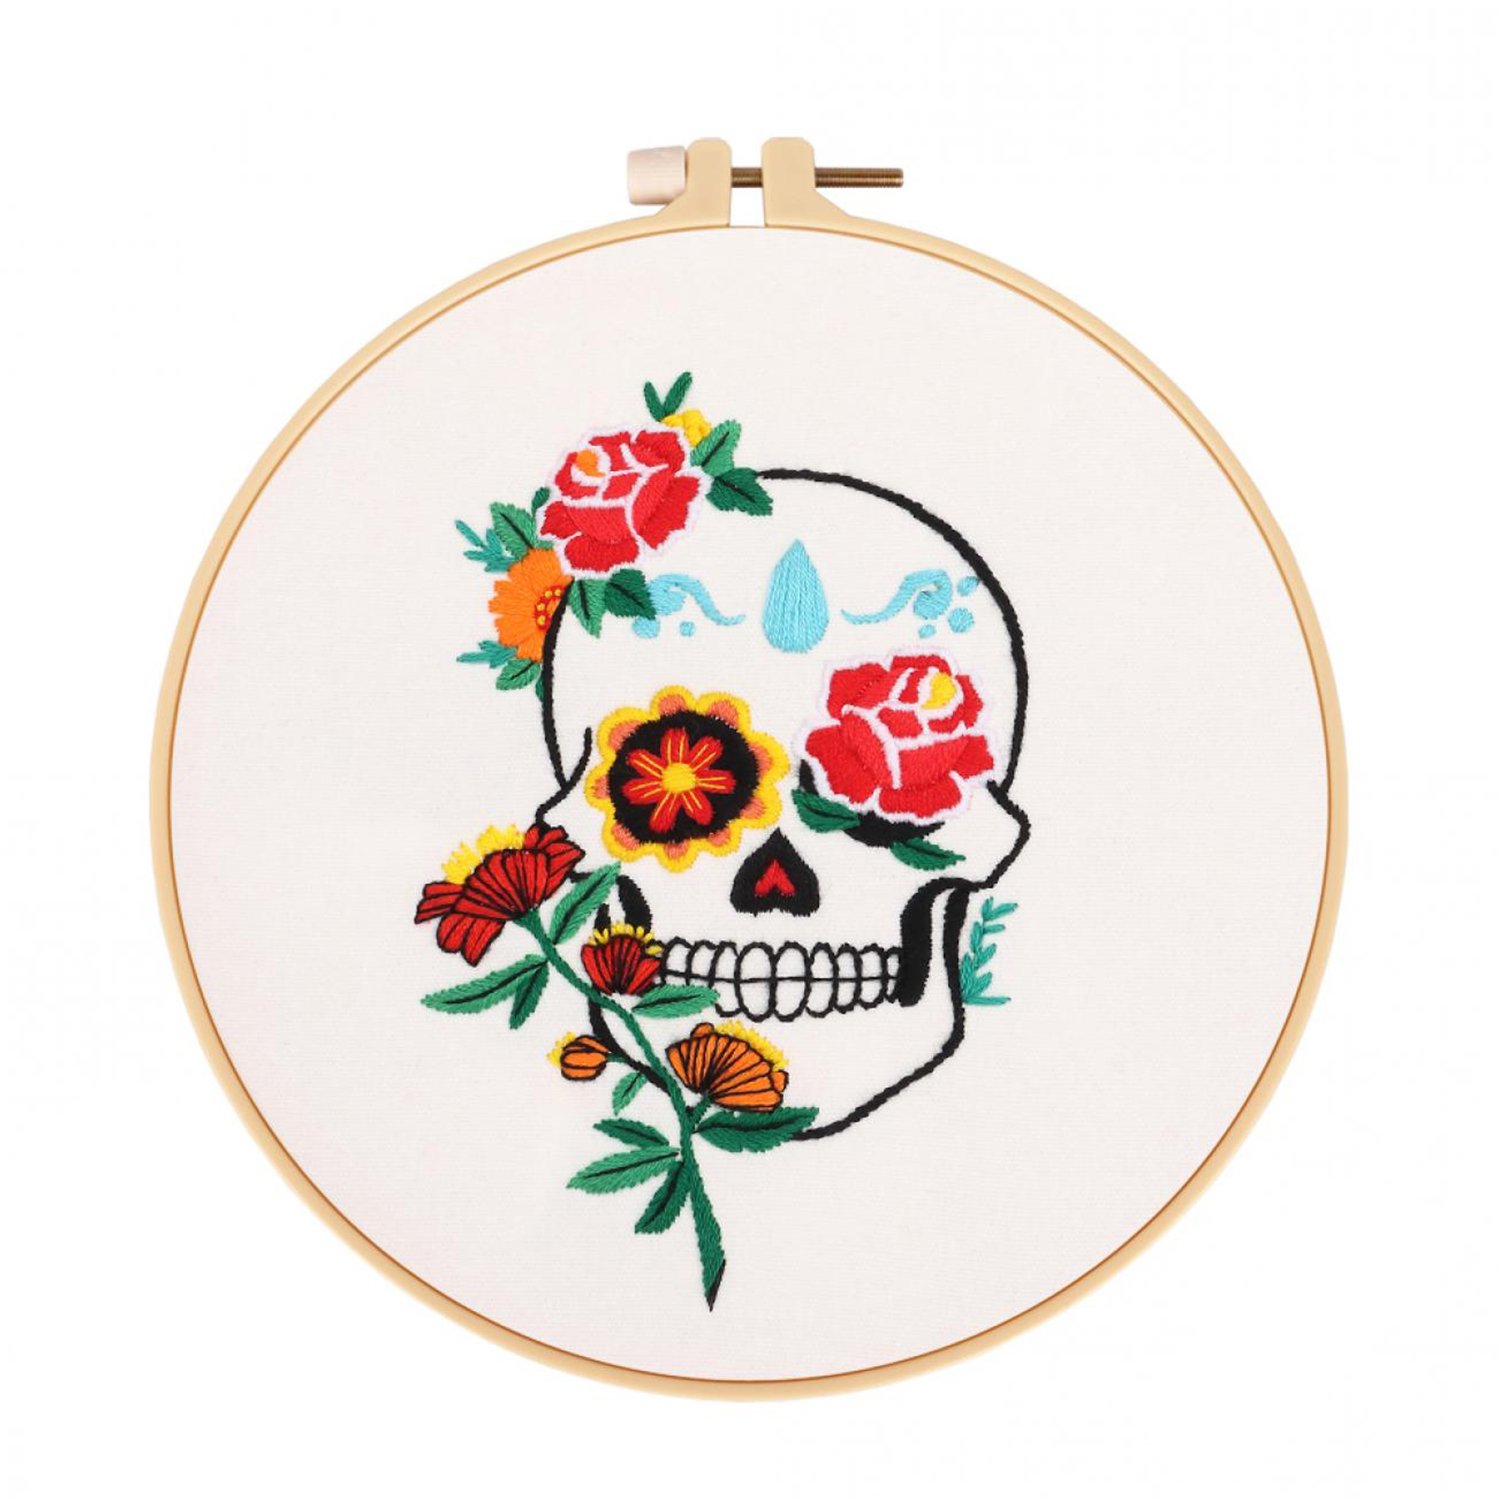 Craft Hand Embroidery Kit Cross stitch kit for Adult Beginner - Halloween Pattern